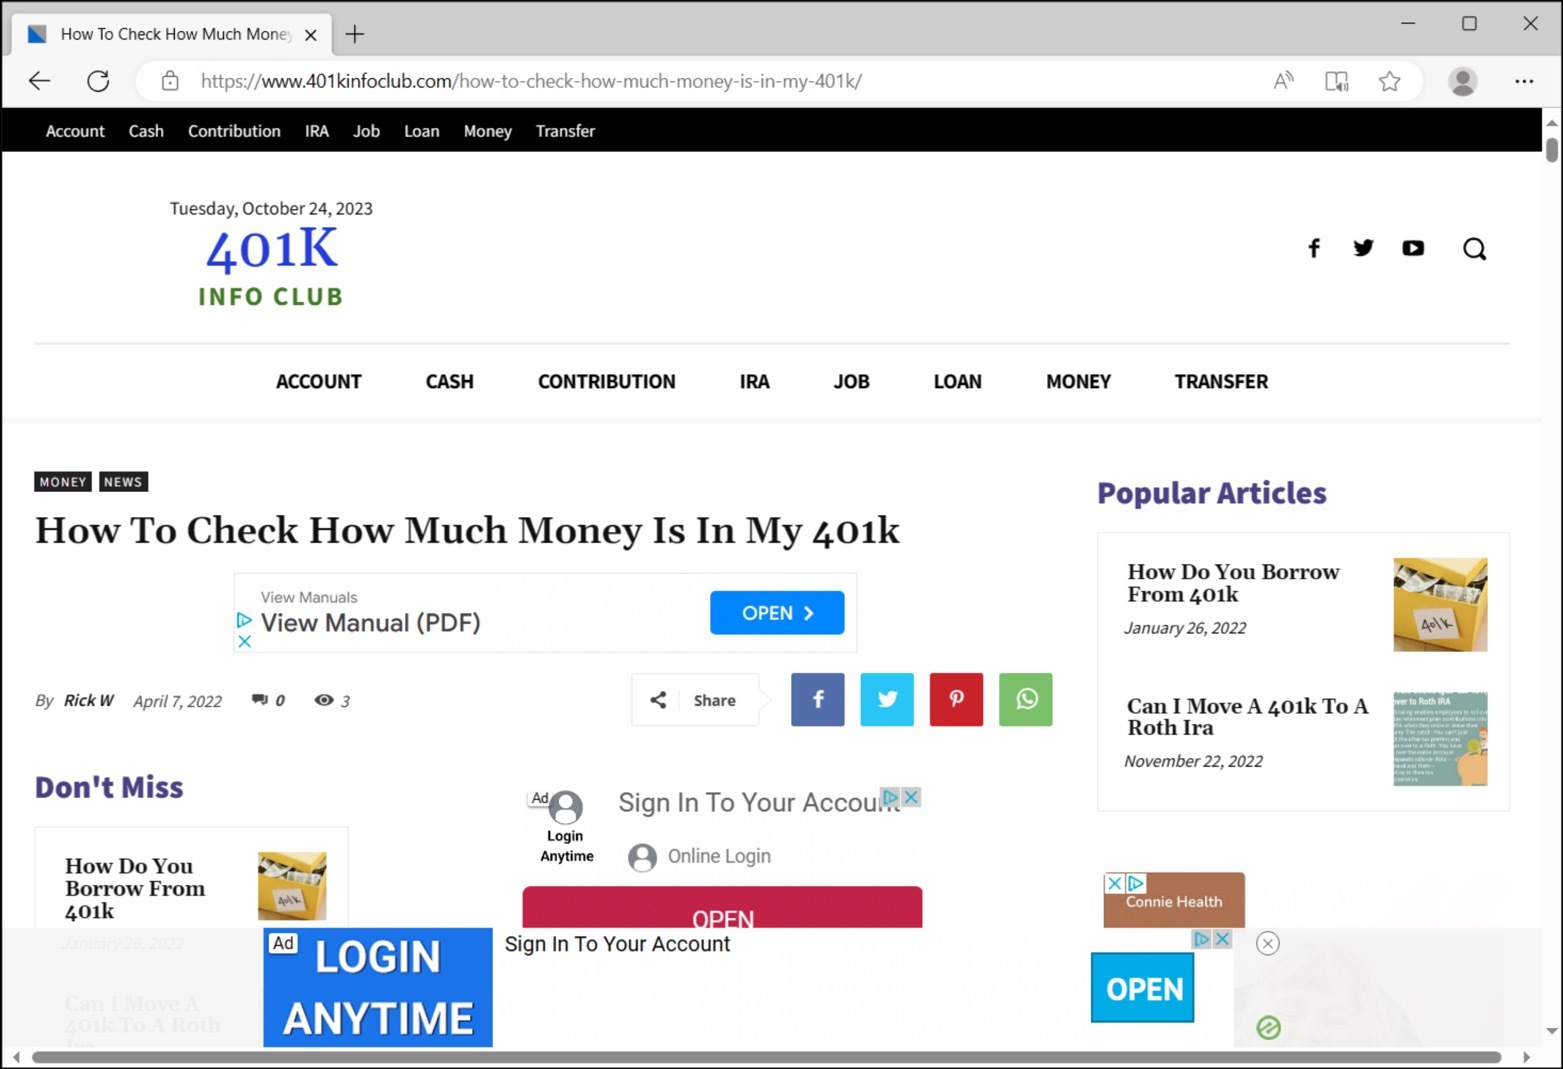 Image 1 is a screenshot of a website publishing a finance-themed clickbait article. How to check how much money is in my 401(k). The site is cluttered with buttons and ads. There's a column for popular articles. There are content categories at the top of the website such as account, cash, contribution, and more. The article publication date is Tuesday, October 24, 2023.